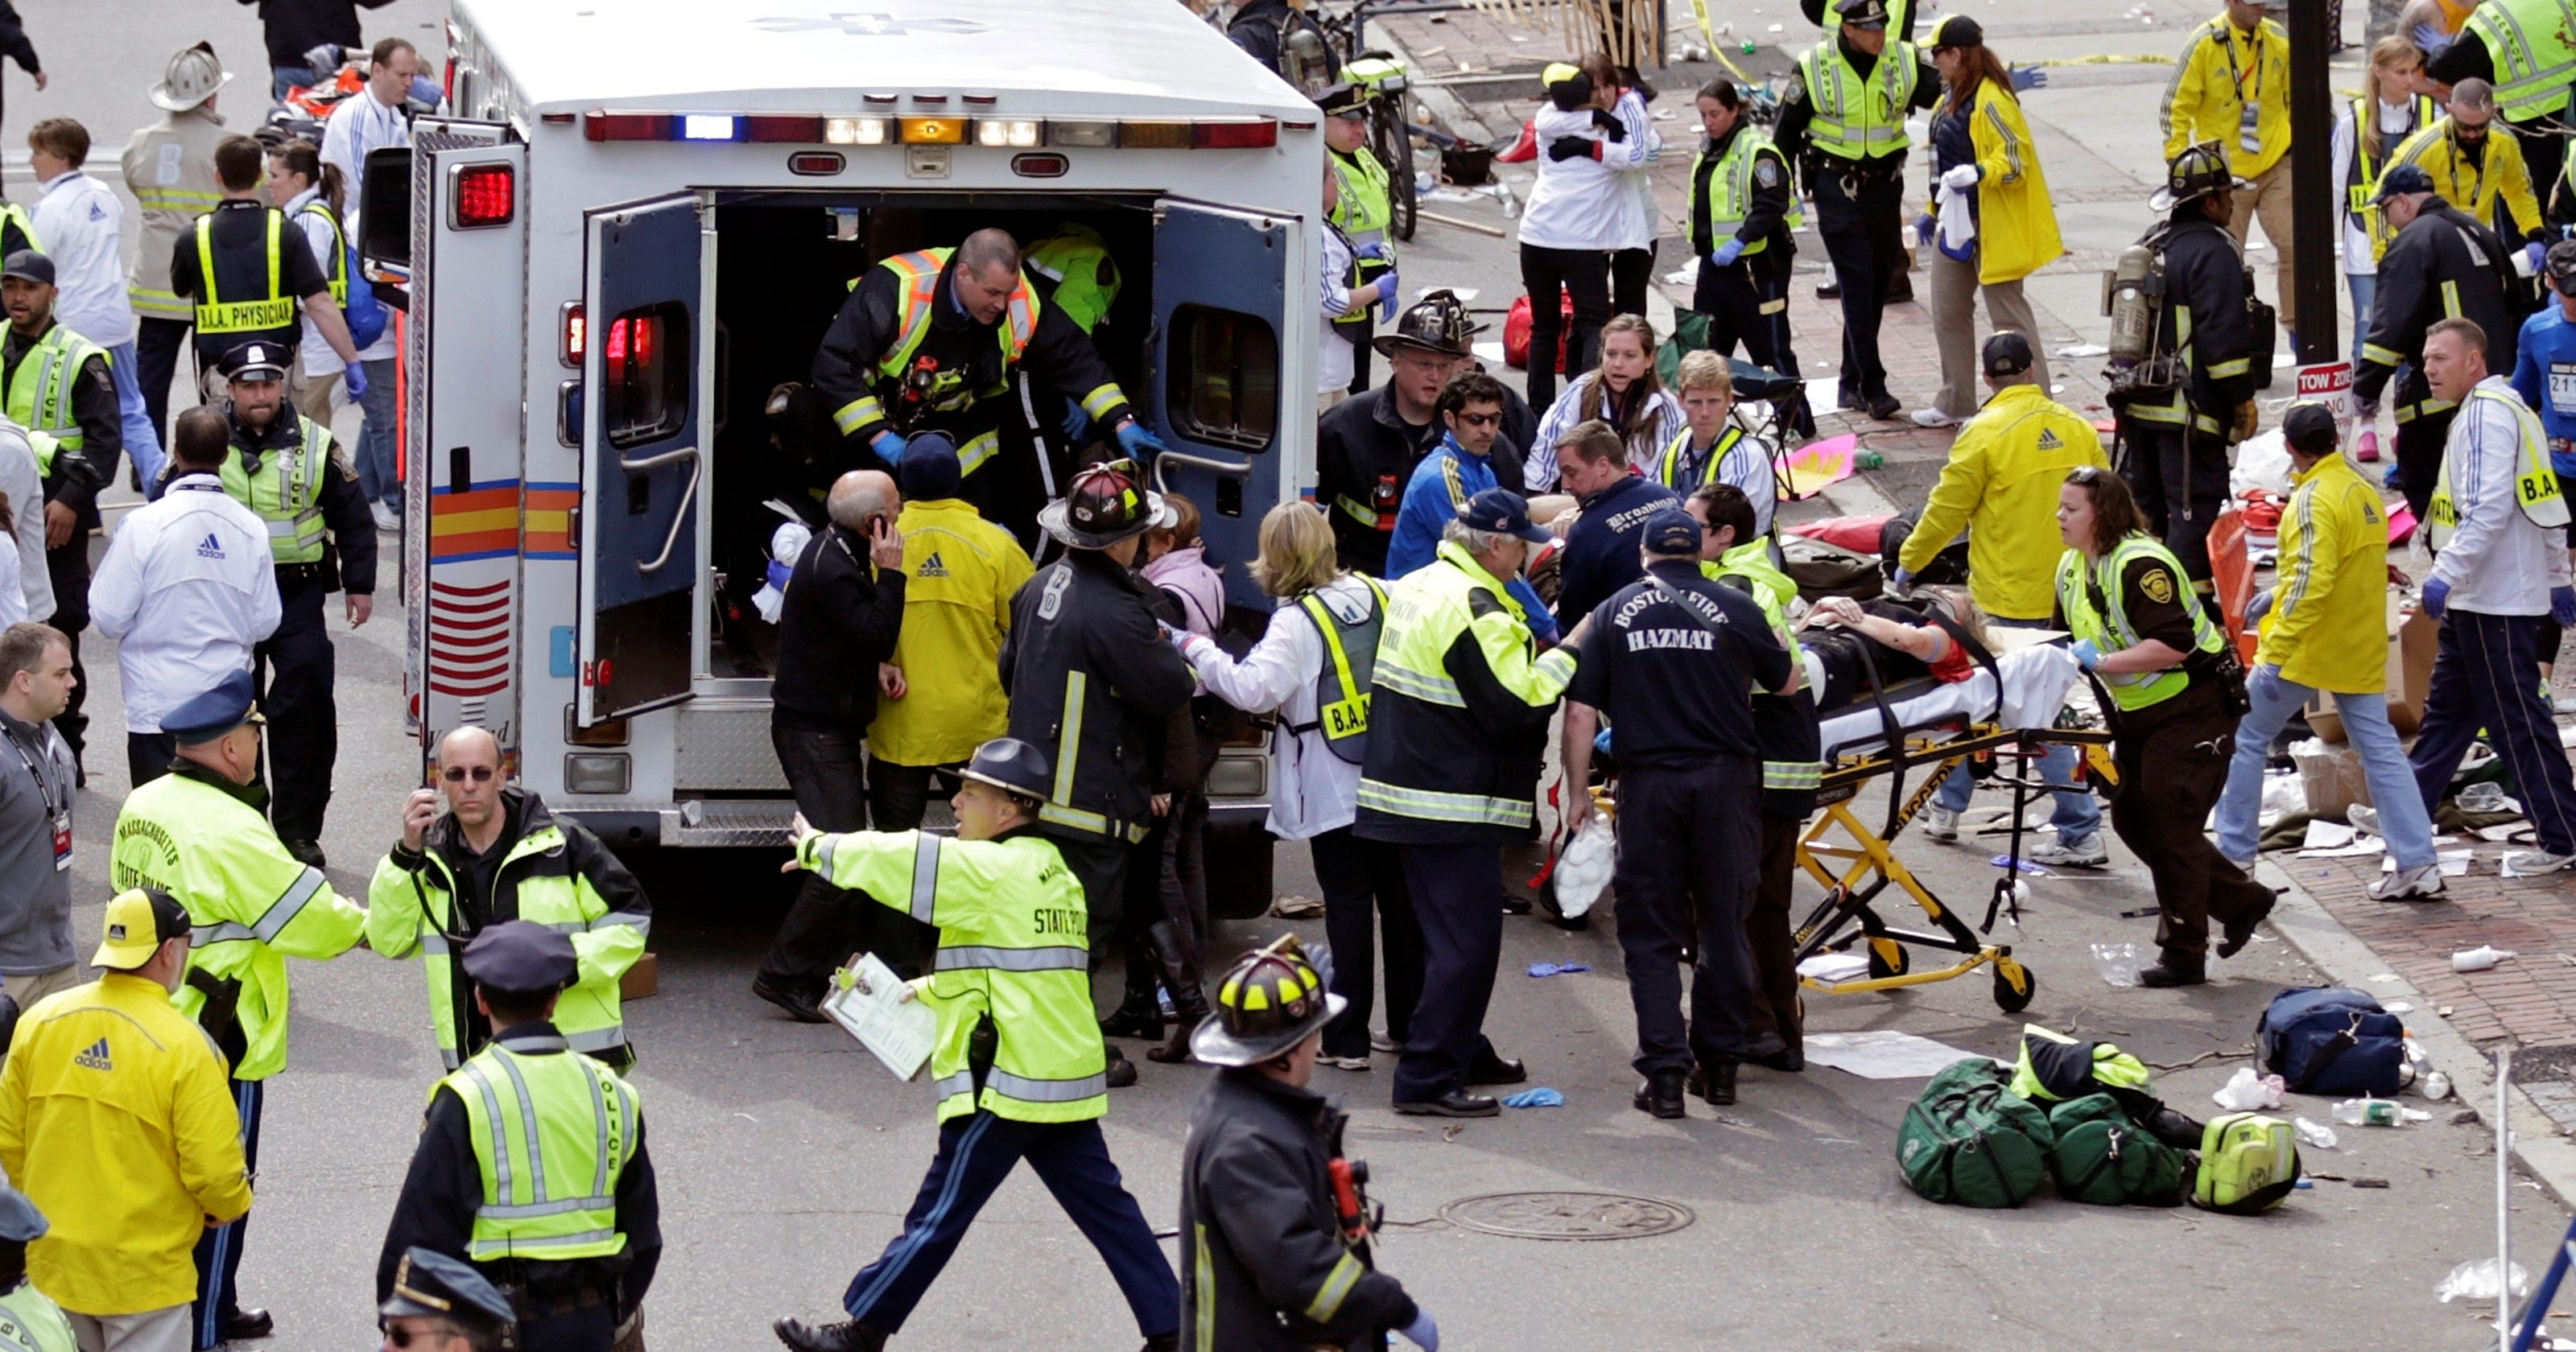 Boston attack shows security never can be guaranteed